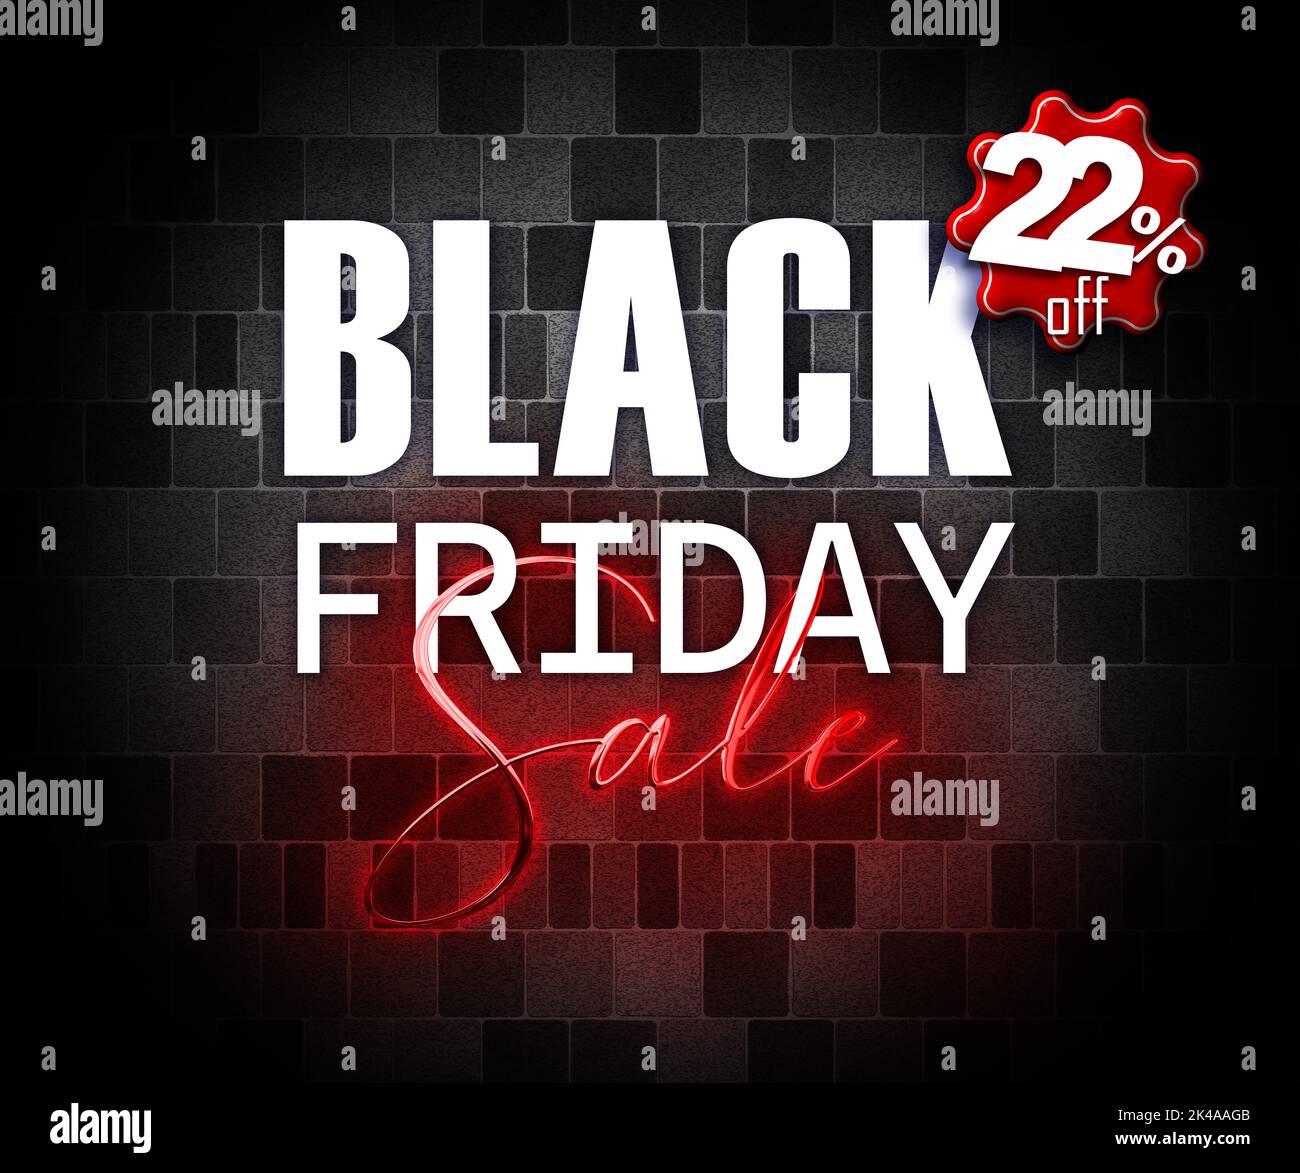 illustration with 3d elements black friday promotion banner 22 percent off sales increase Stock Photo